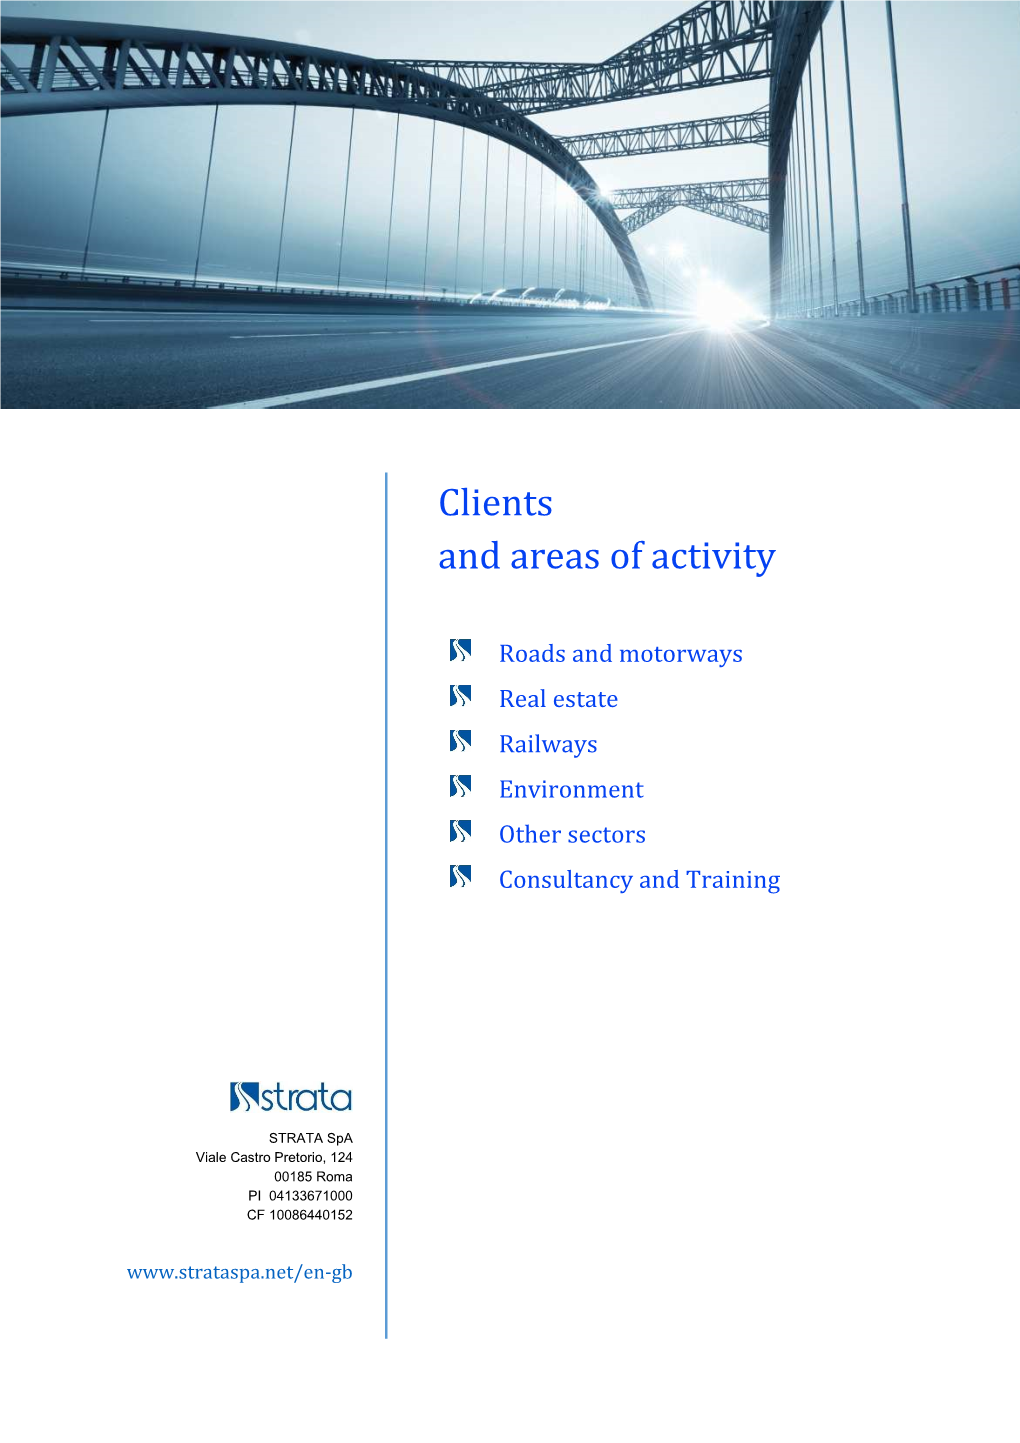 Clients and Areas of Activity